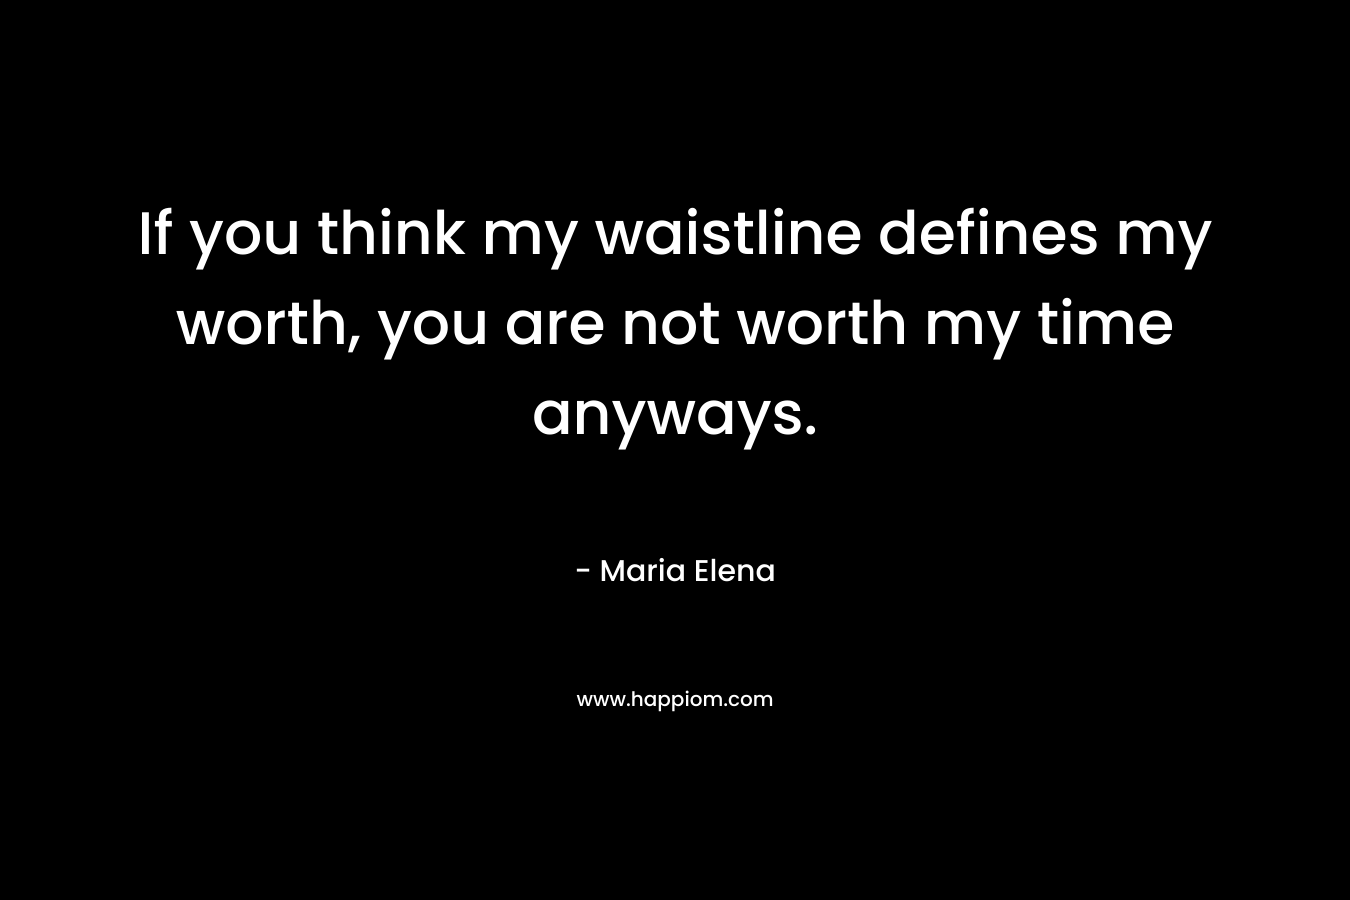 If you think my waistline defines my worth, you are not worth my time anyways. – Maria Elena